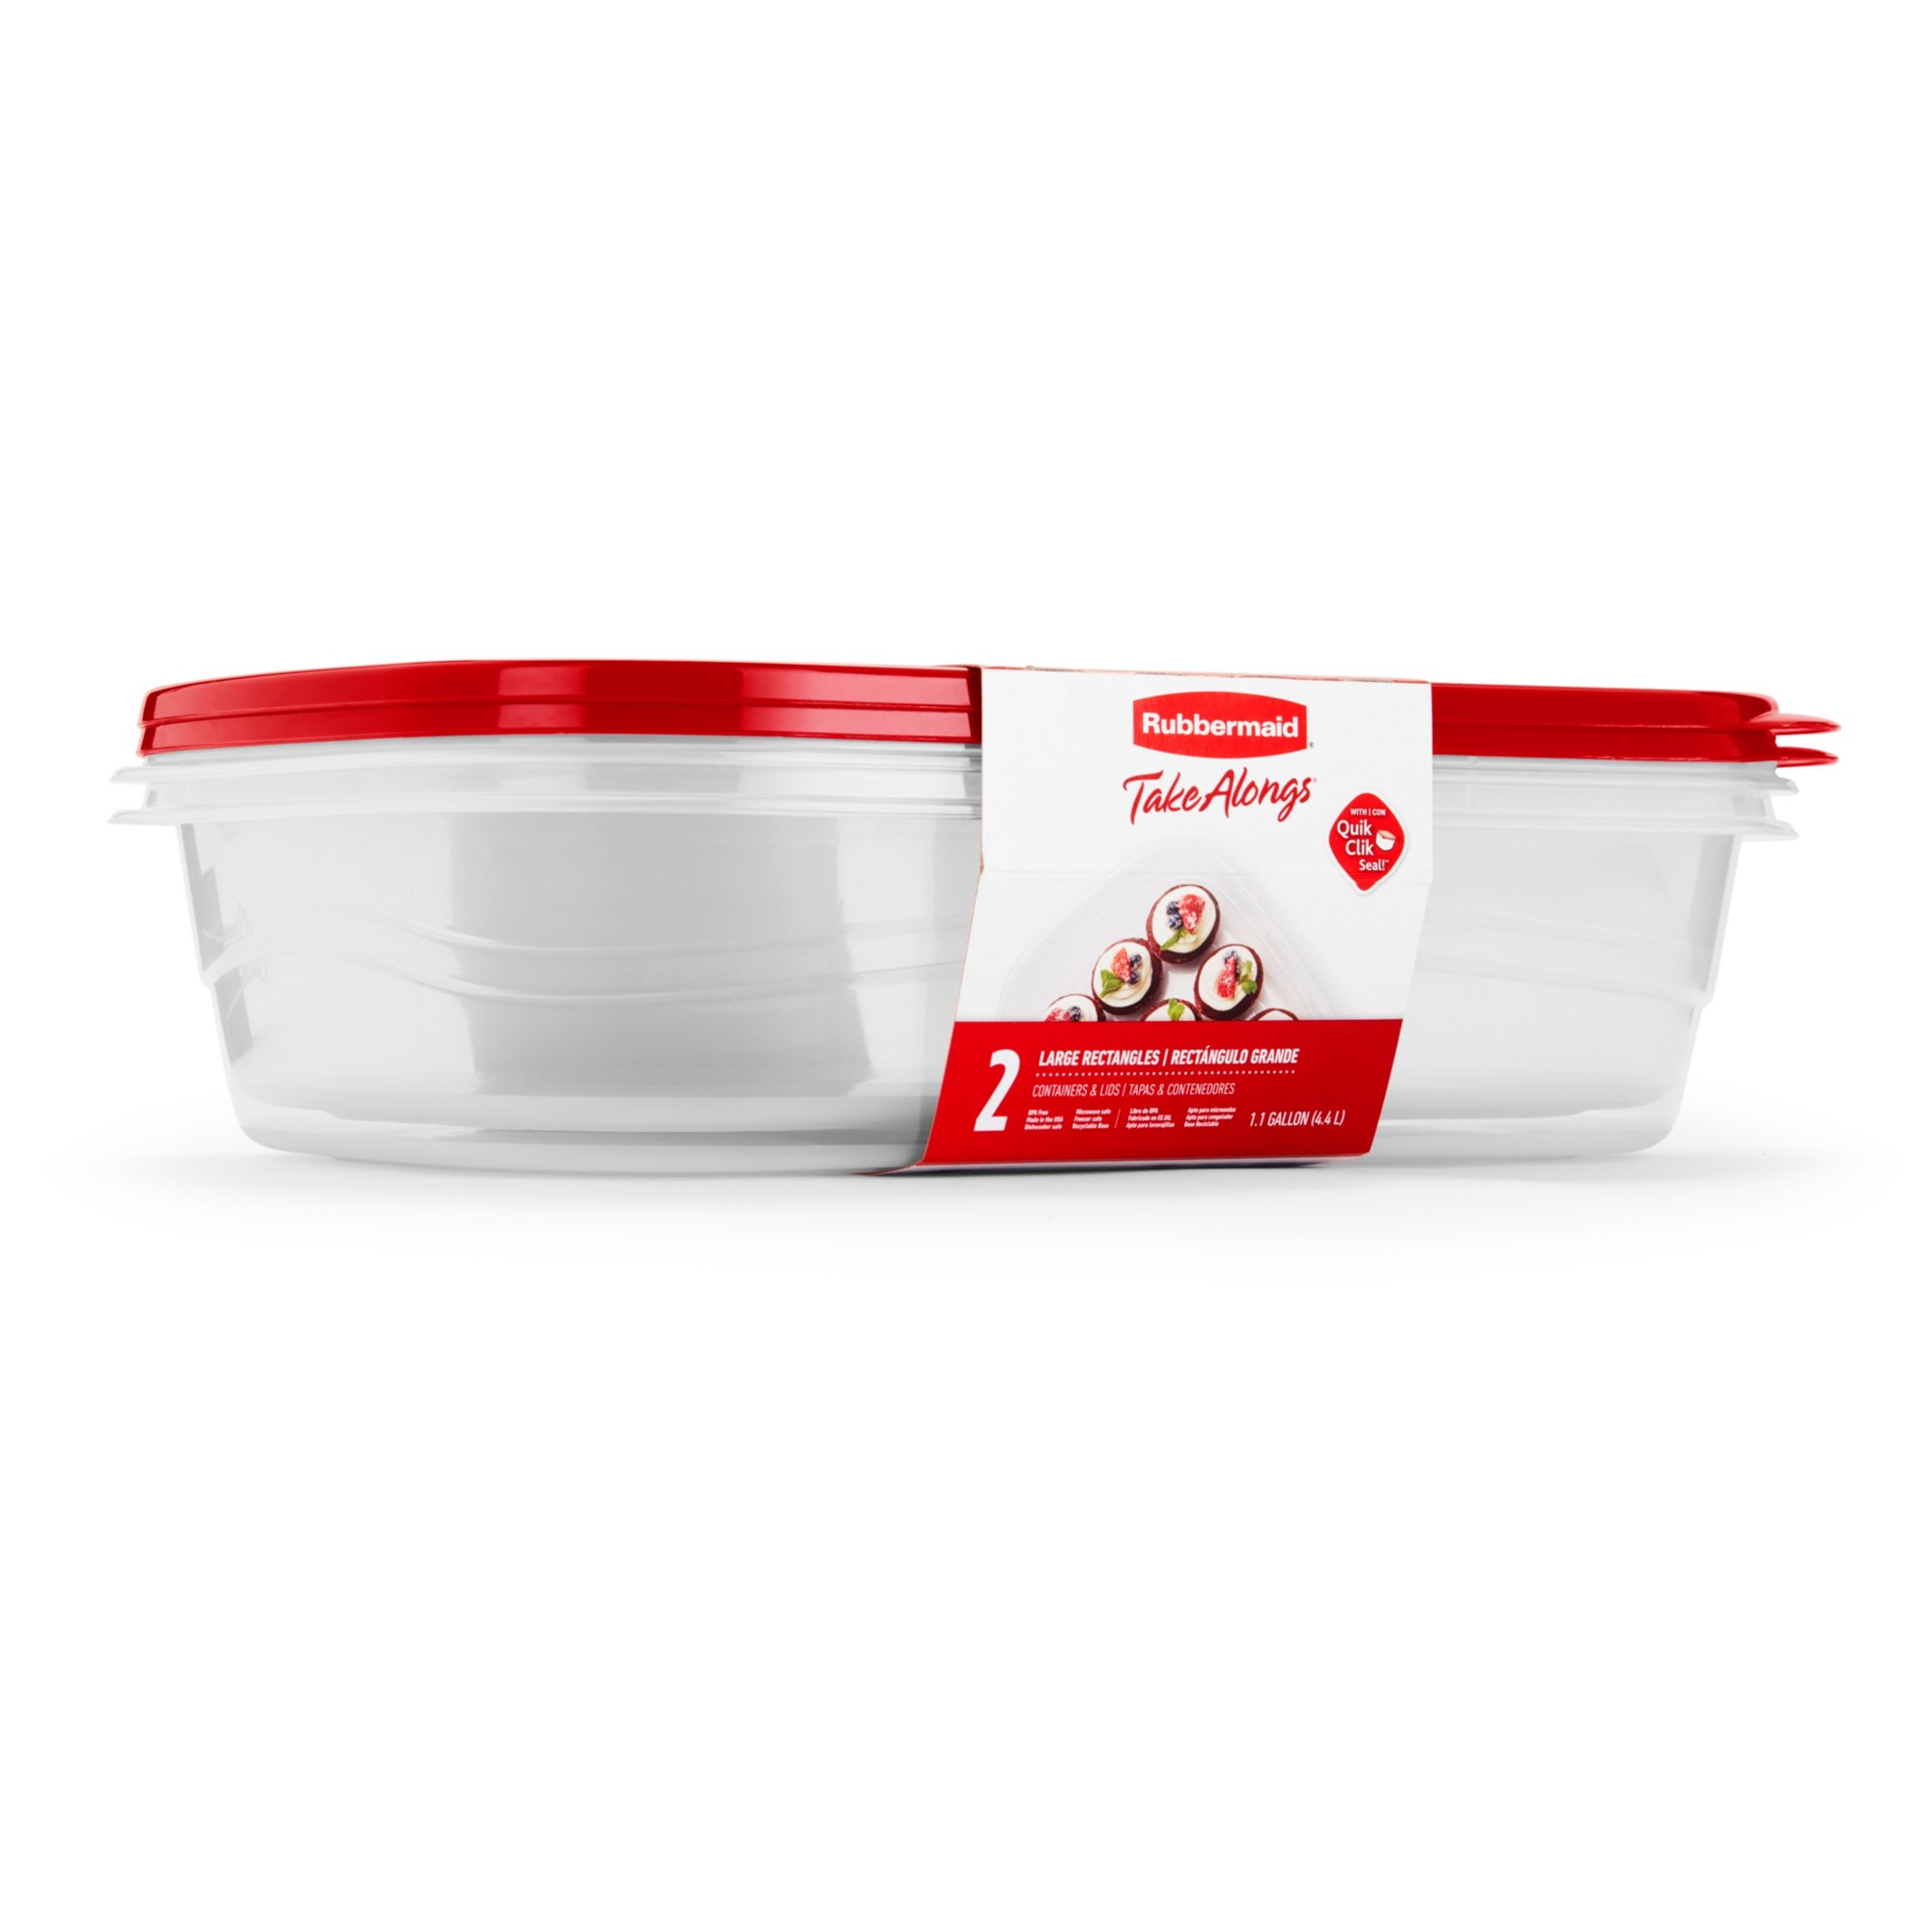 https://s7d9.scene7.com/is/image/NewellRubbermaid/2086752-rubbermaid-food-storage-takealongs-OS-1.0G-3.7L-TKA-RECT-2PK-RUBY-in-pack-right-angle?wid=2000&hei=2000